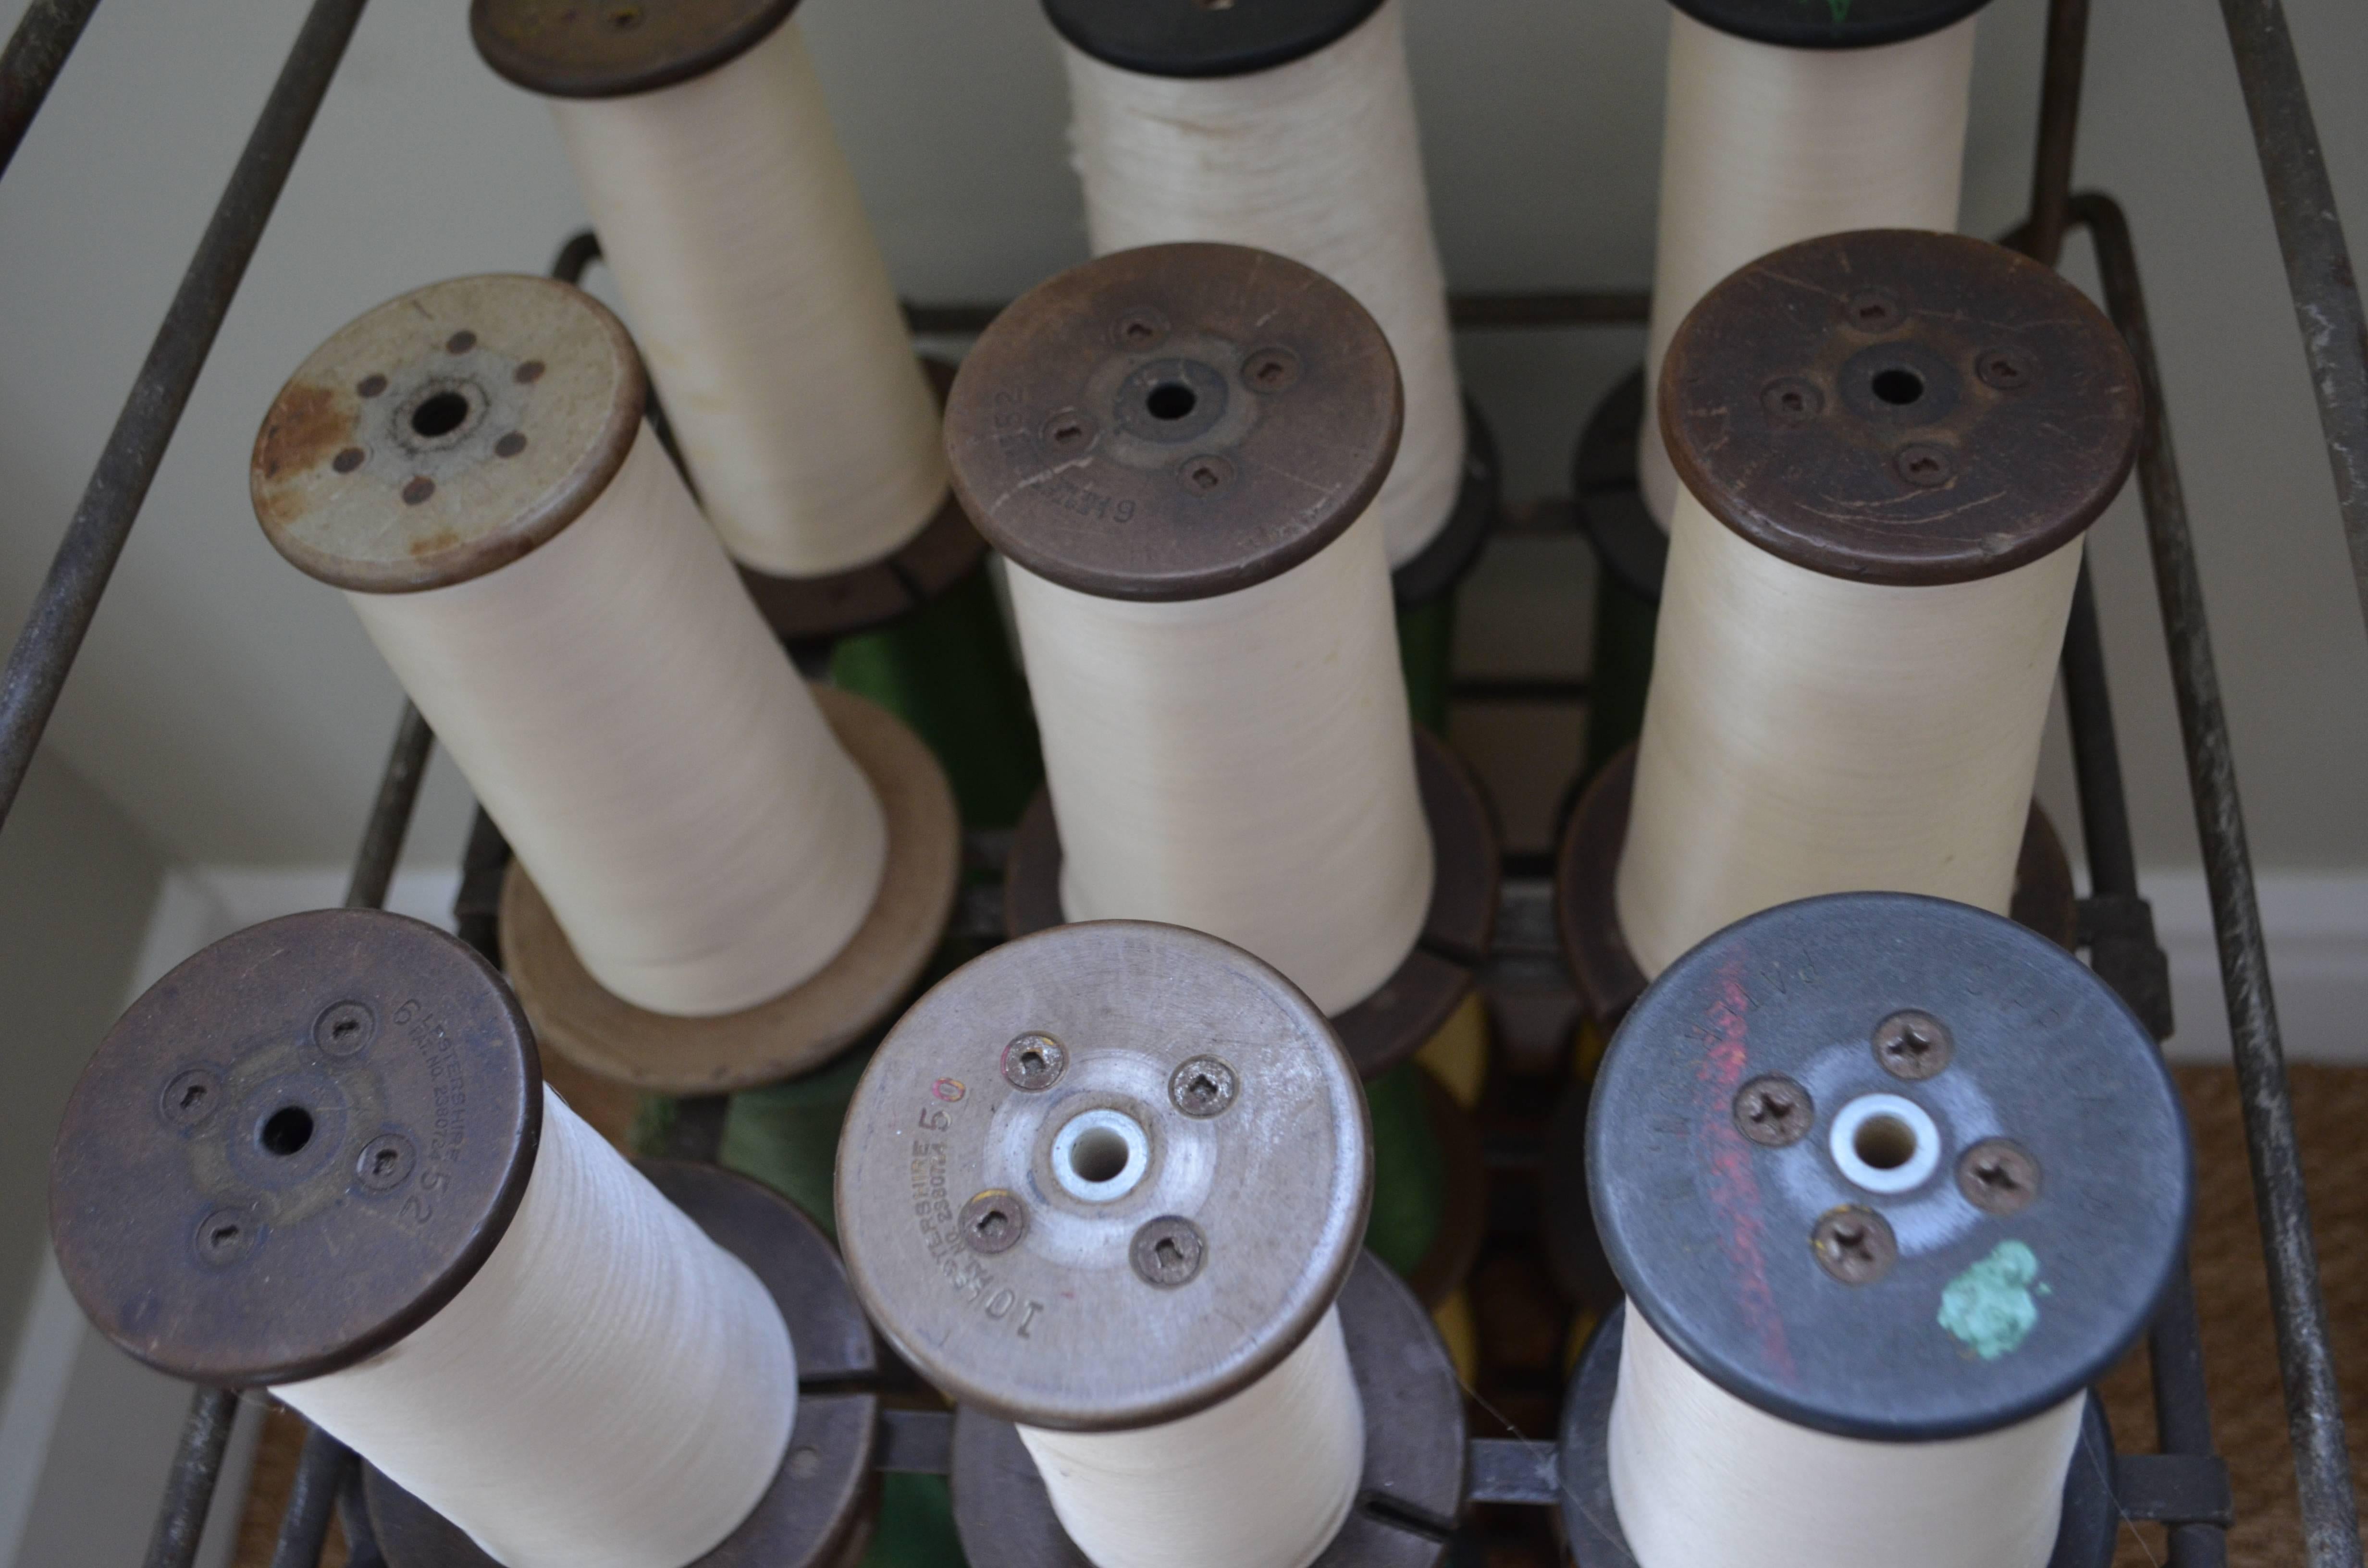 American Industrial Thread Spooler with 36 Spools of Colorful Thread